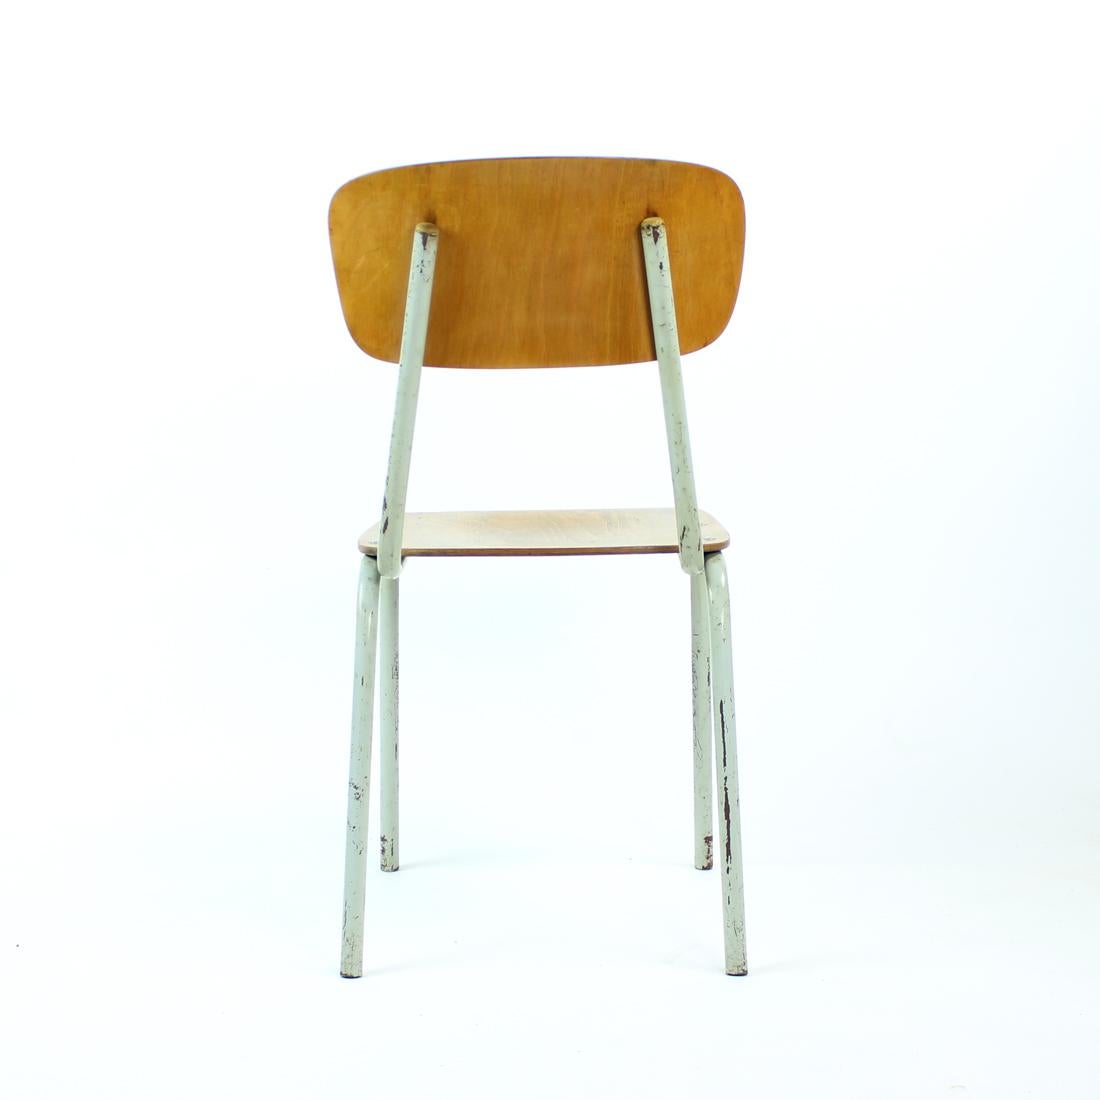 Mid-20th Century School Chair In Metal And Plywood, Kovona, Czechoslovakia 1960s For Sale